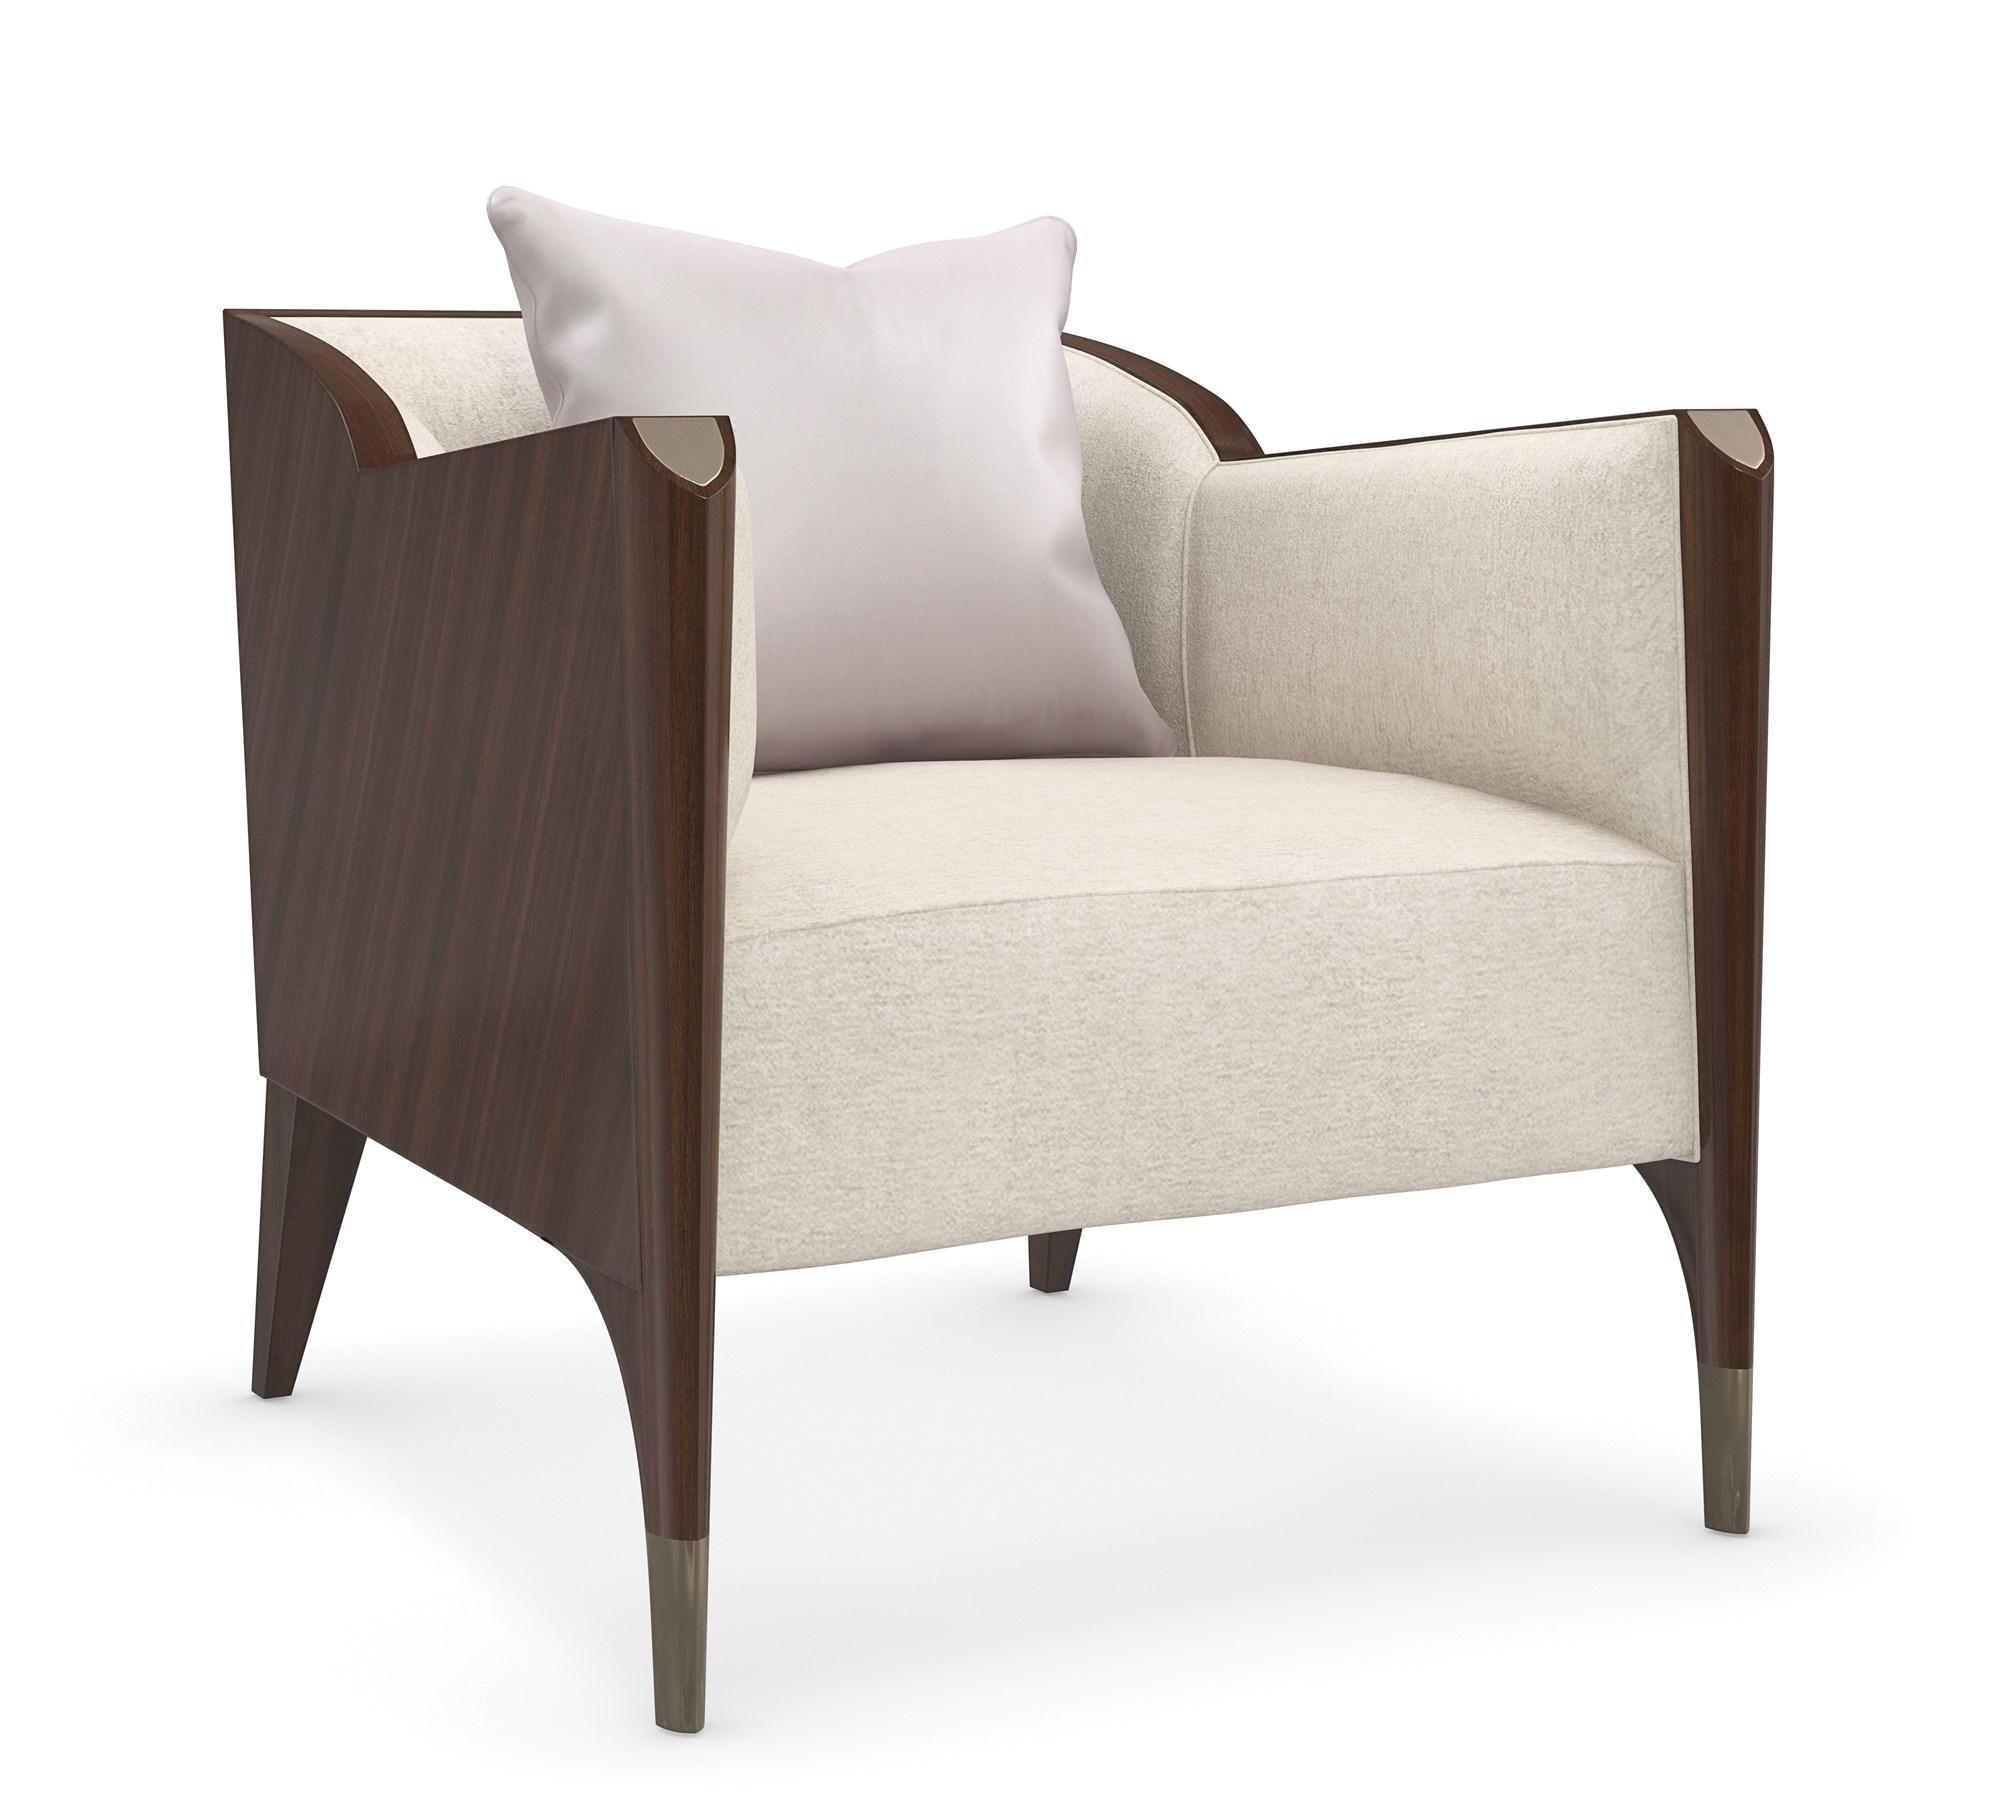 

    
Sapele Veneers Afterglow Fabric THE OXFORD ACCENT CHAIR by Caracole
